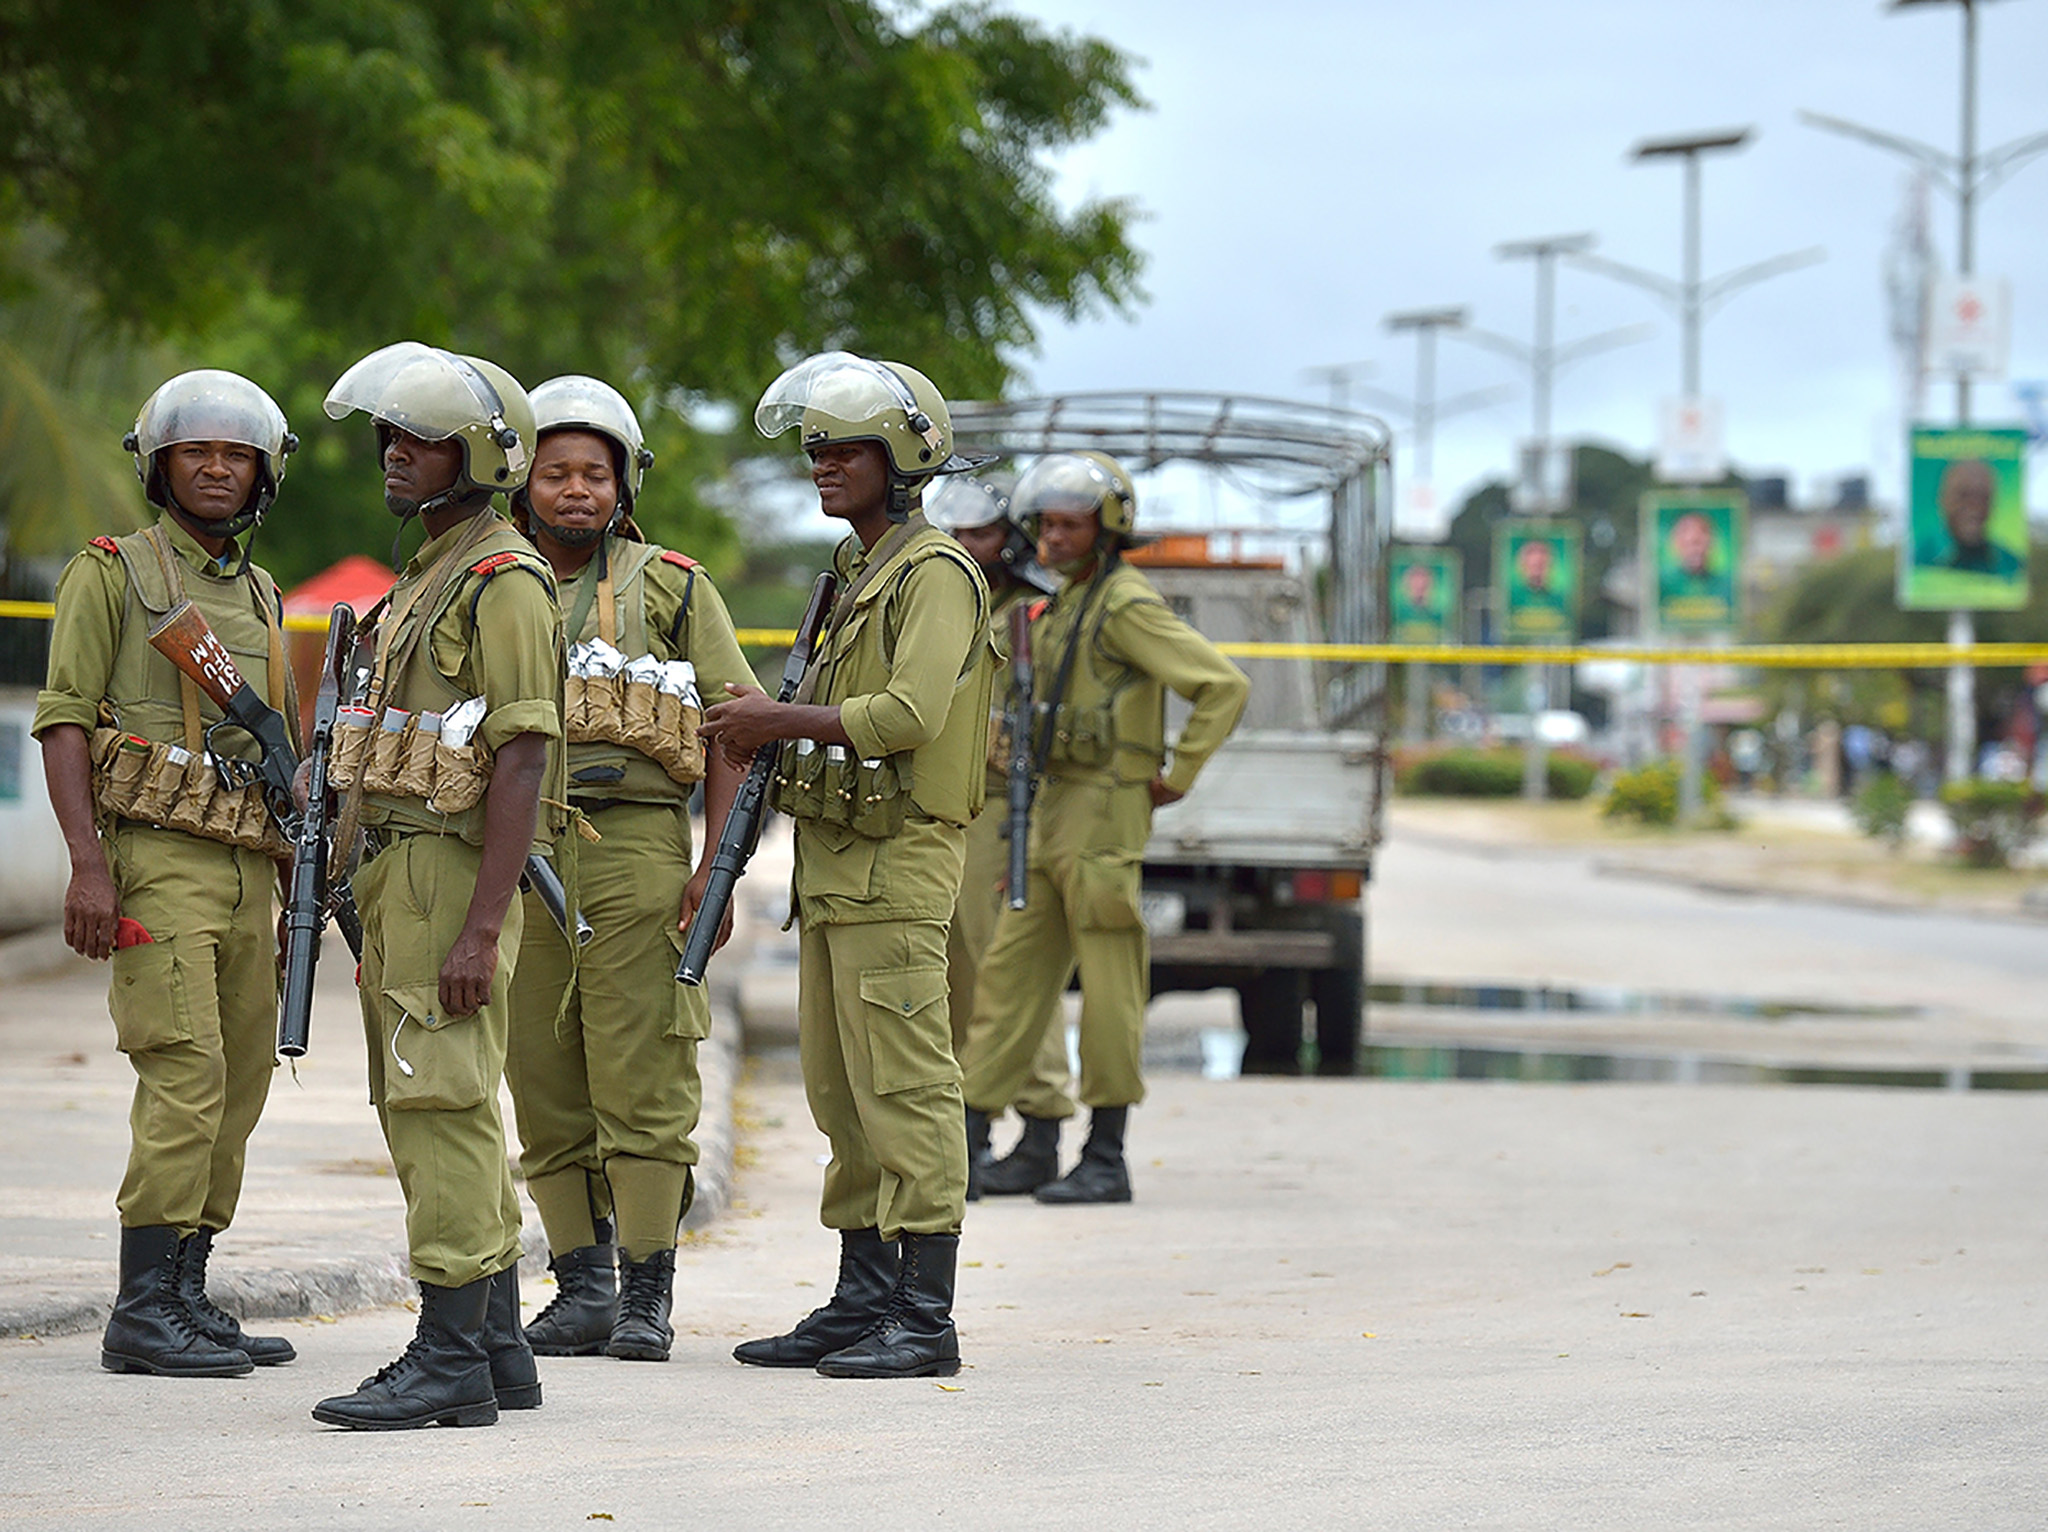 Police in Zanzibar enforce a cordon at the scene of an explosion of suspected improvised explosive devices in October 2015. (Photo by Tony Karumba/AFP/Getty Images)